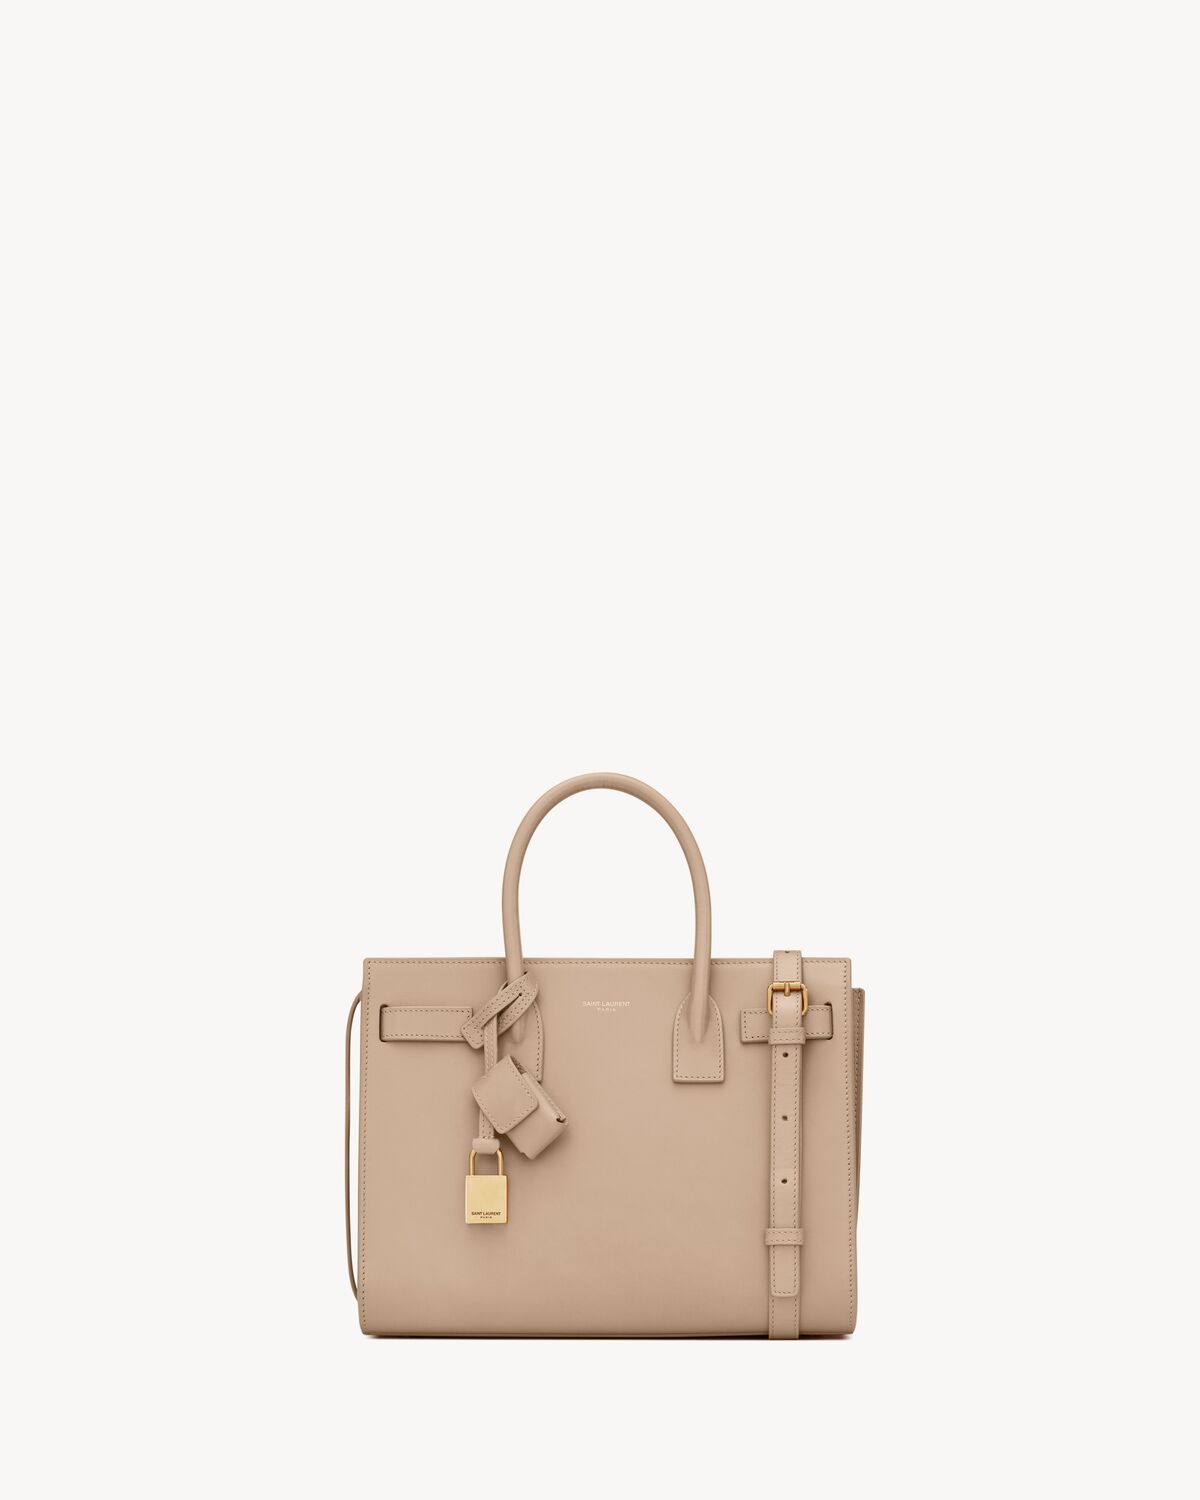 SAC DE JOUR BABY IN SMOOTH LEATHER